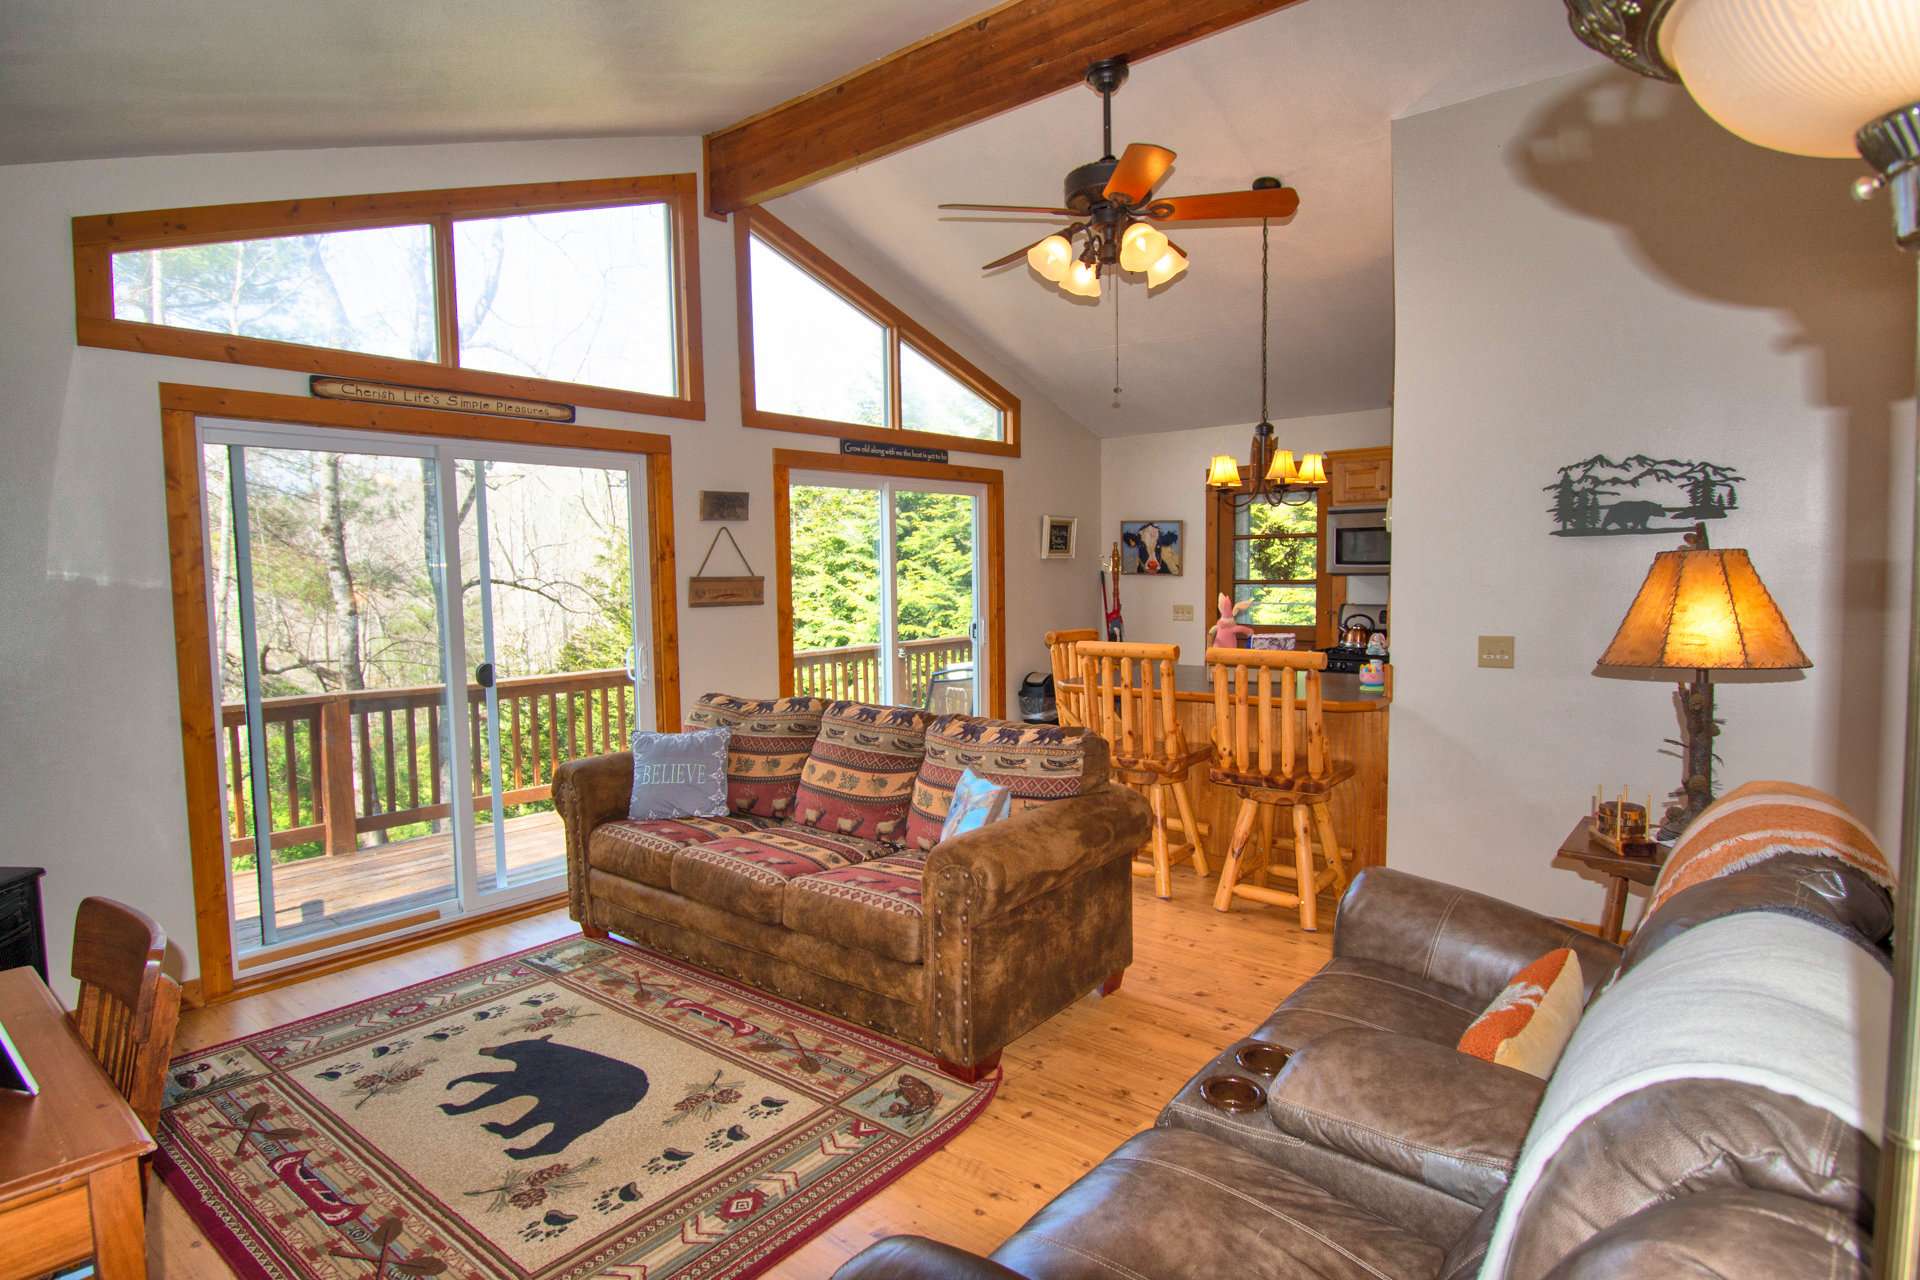 A one-level living floor plan includes a great room with slightly vaulted ceiling, gas stove, two sliding glass doors and high windows filling the room with natural light and a view of the surrounding forest.